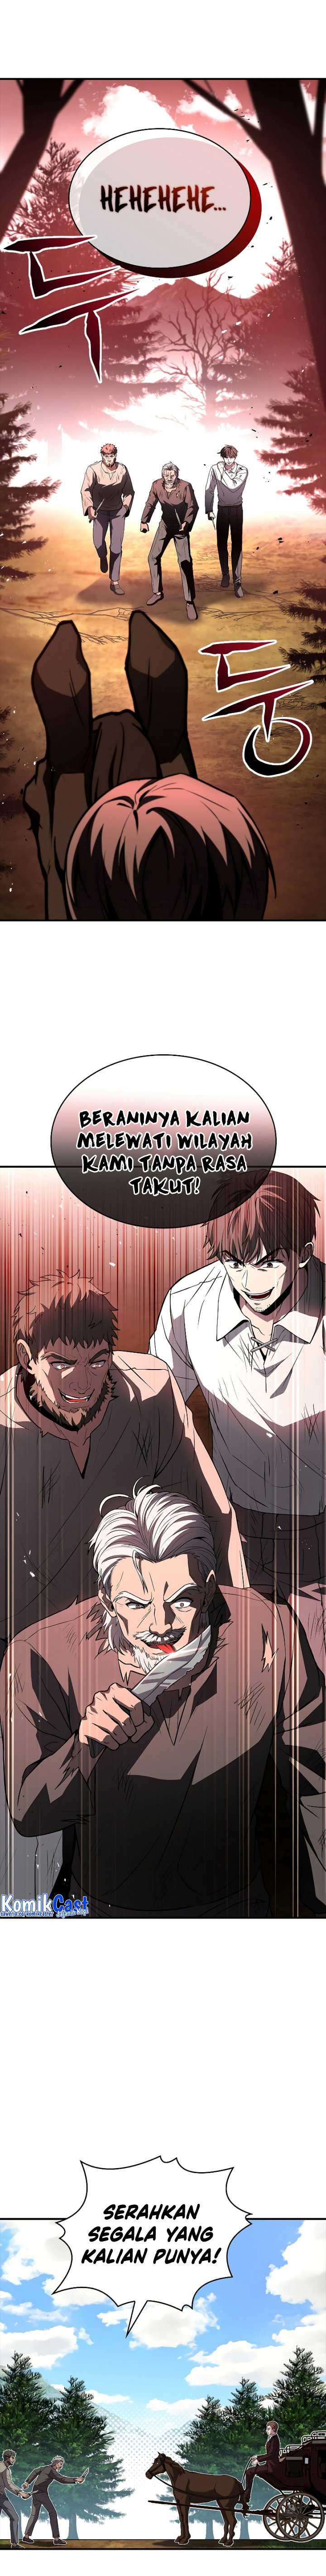 Talent-Swallowing Magician Chapter 51